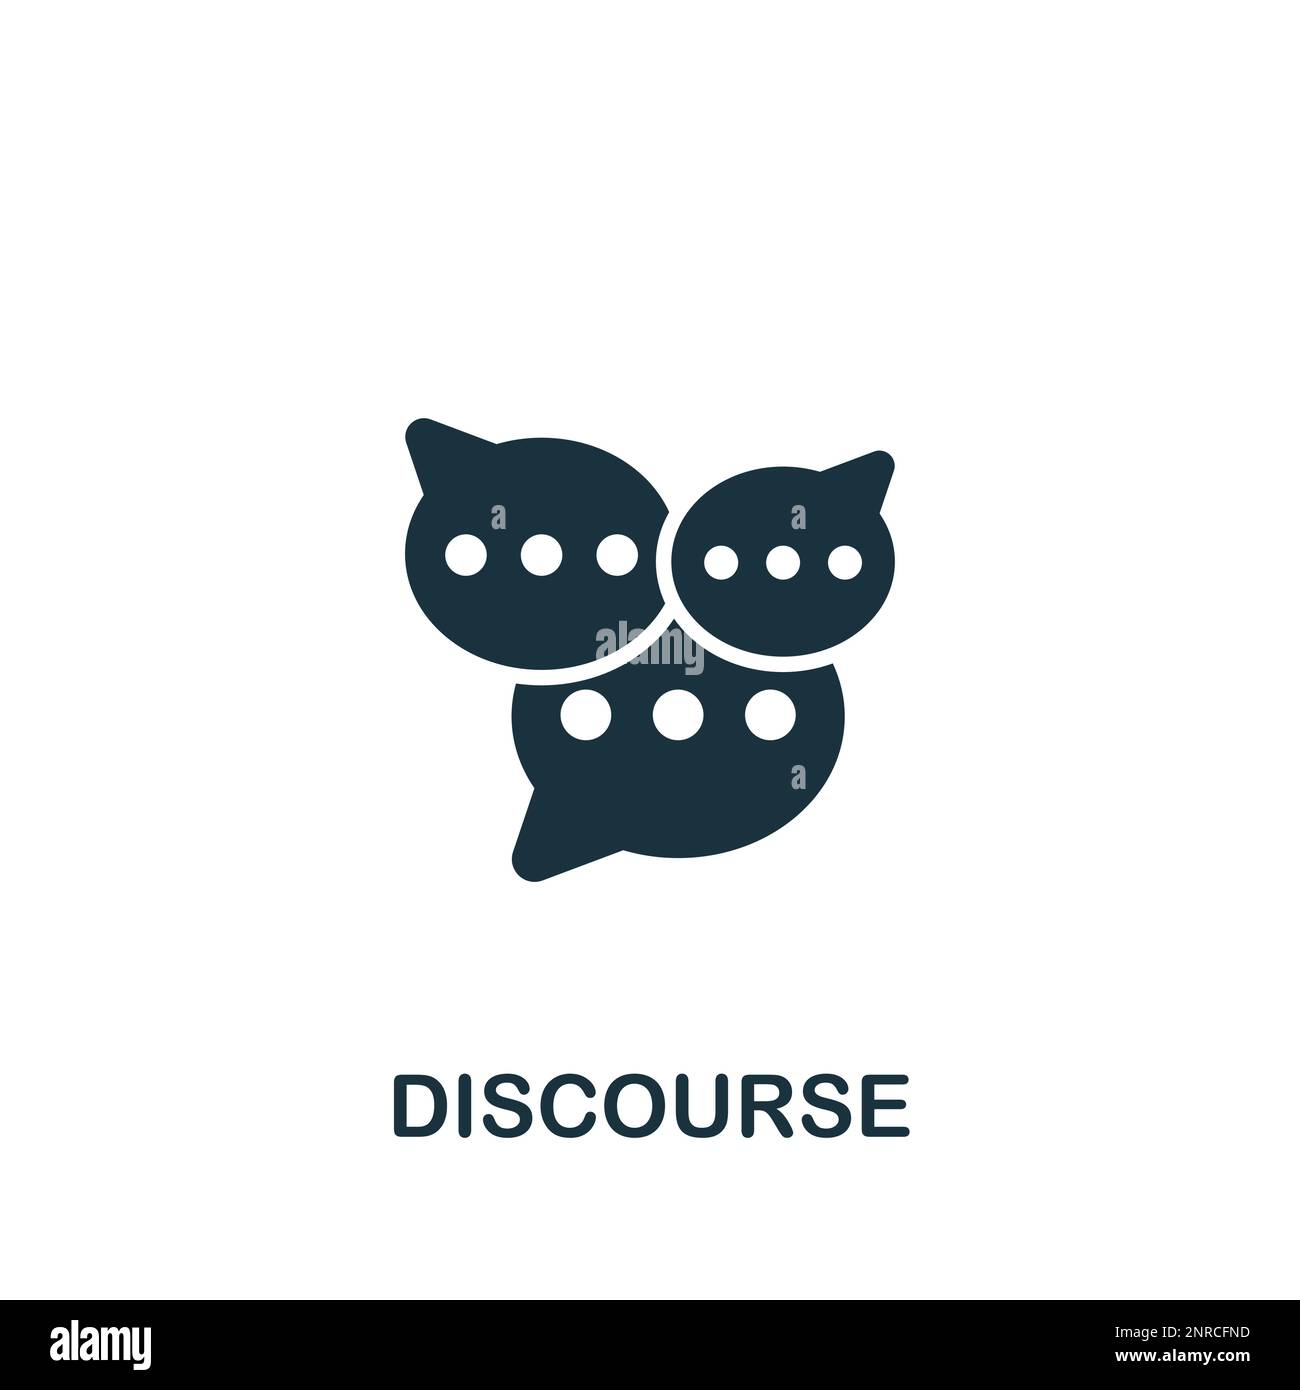 Discourse icon. Monochrome simple sign from speech collection. Discourse icon for logo, templates, web design and infographics. Stock Vector